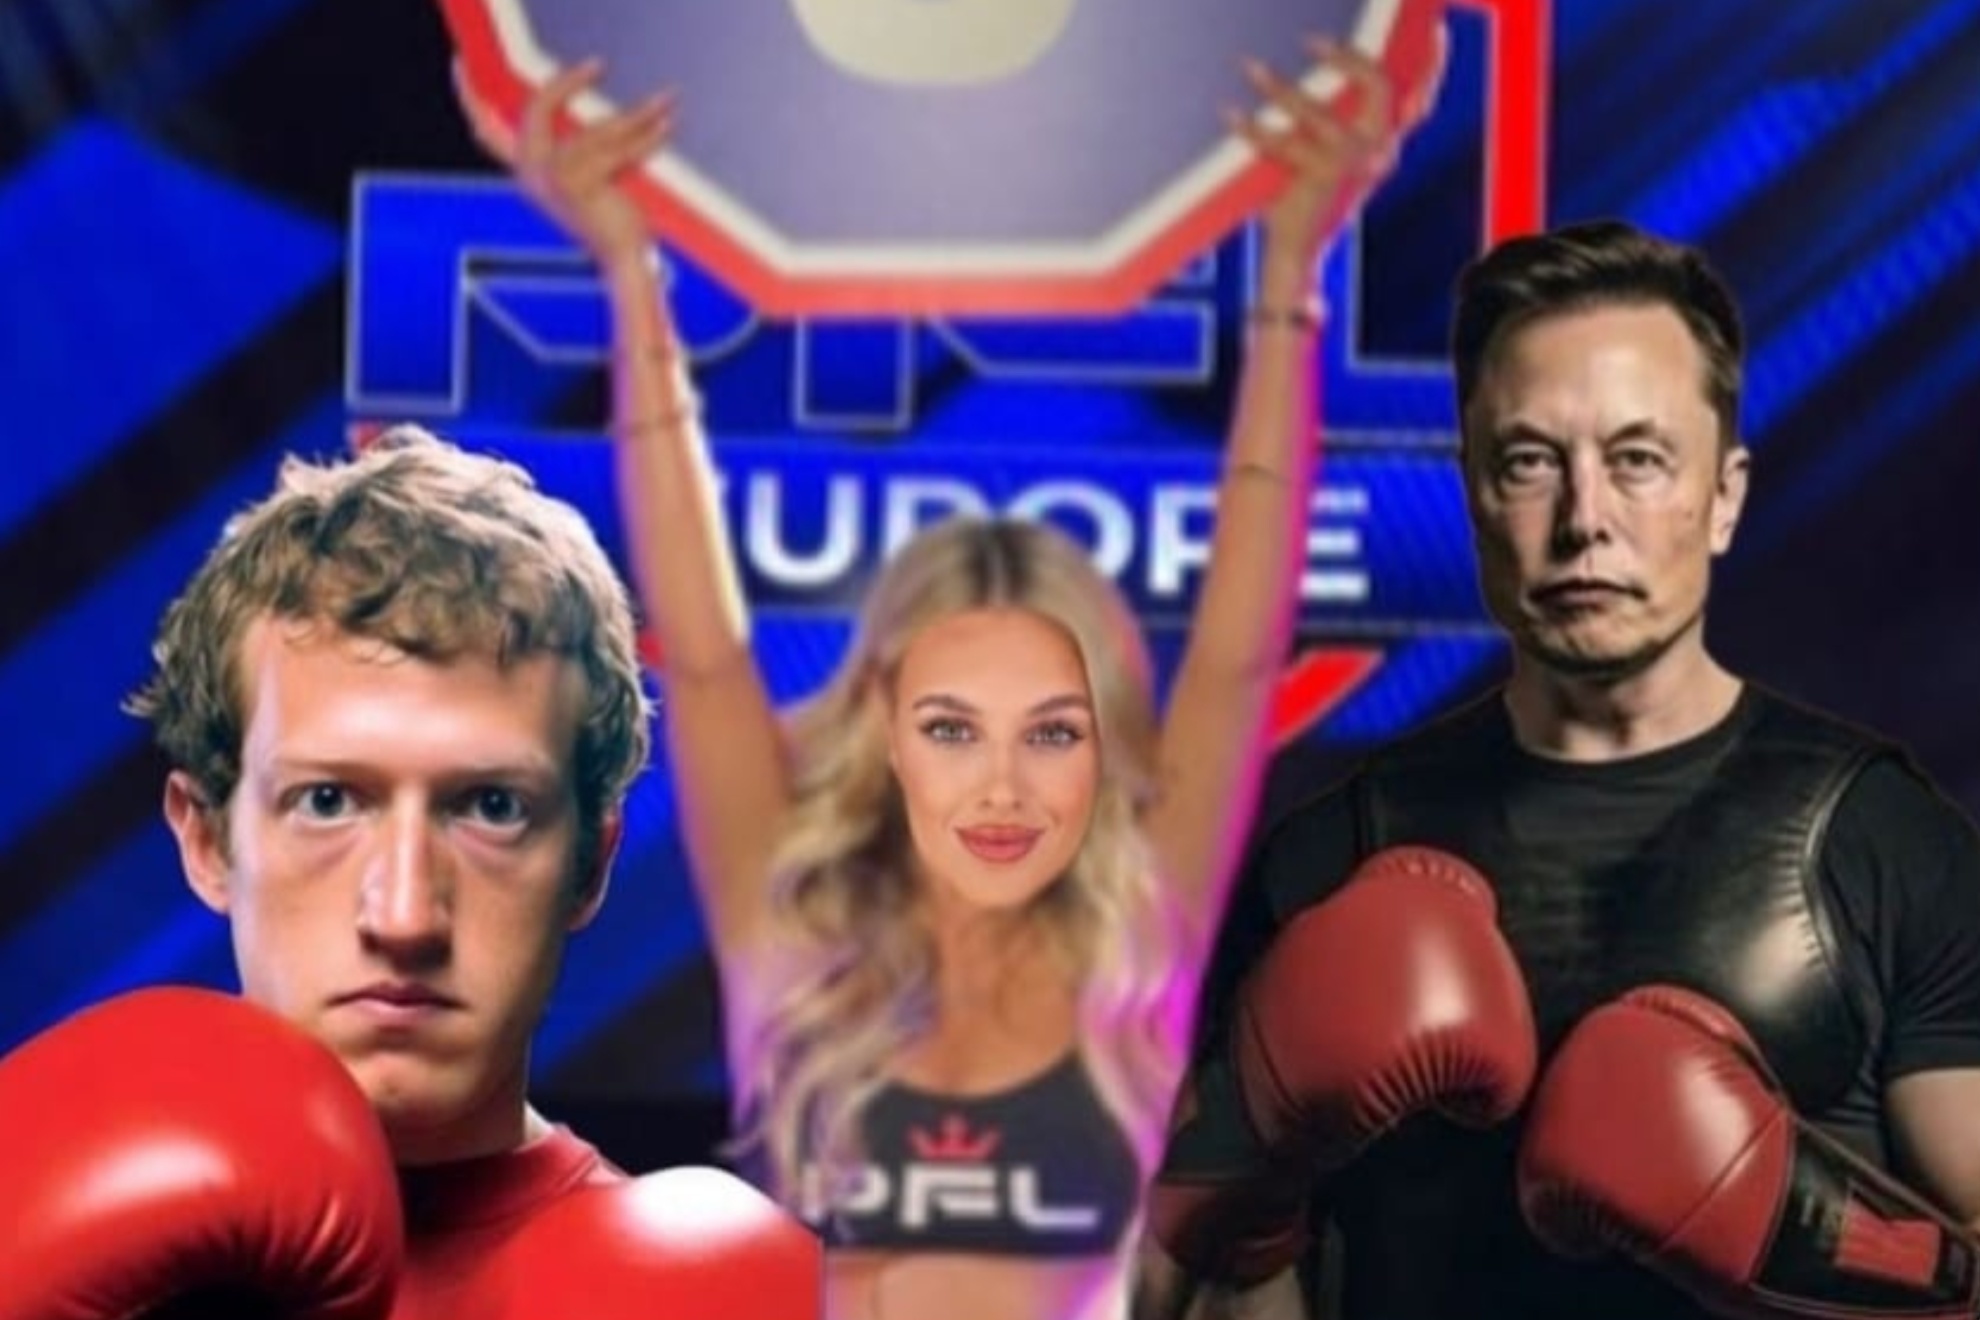 Veronika Rajek (center) made an offer to Zuckerberg (left) and Musk (right) in Threads.